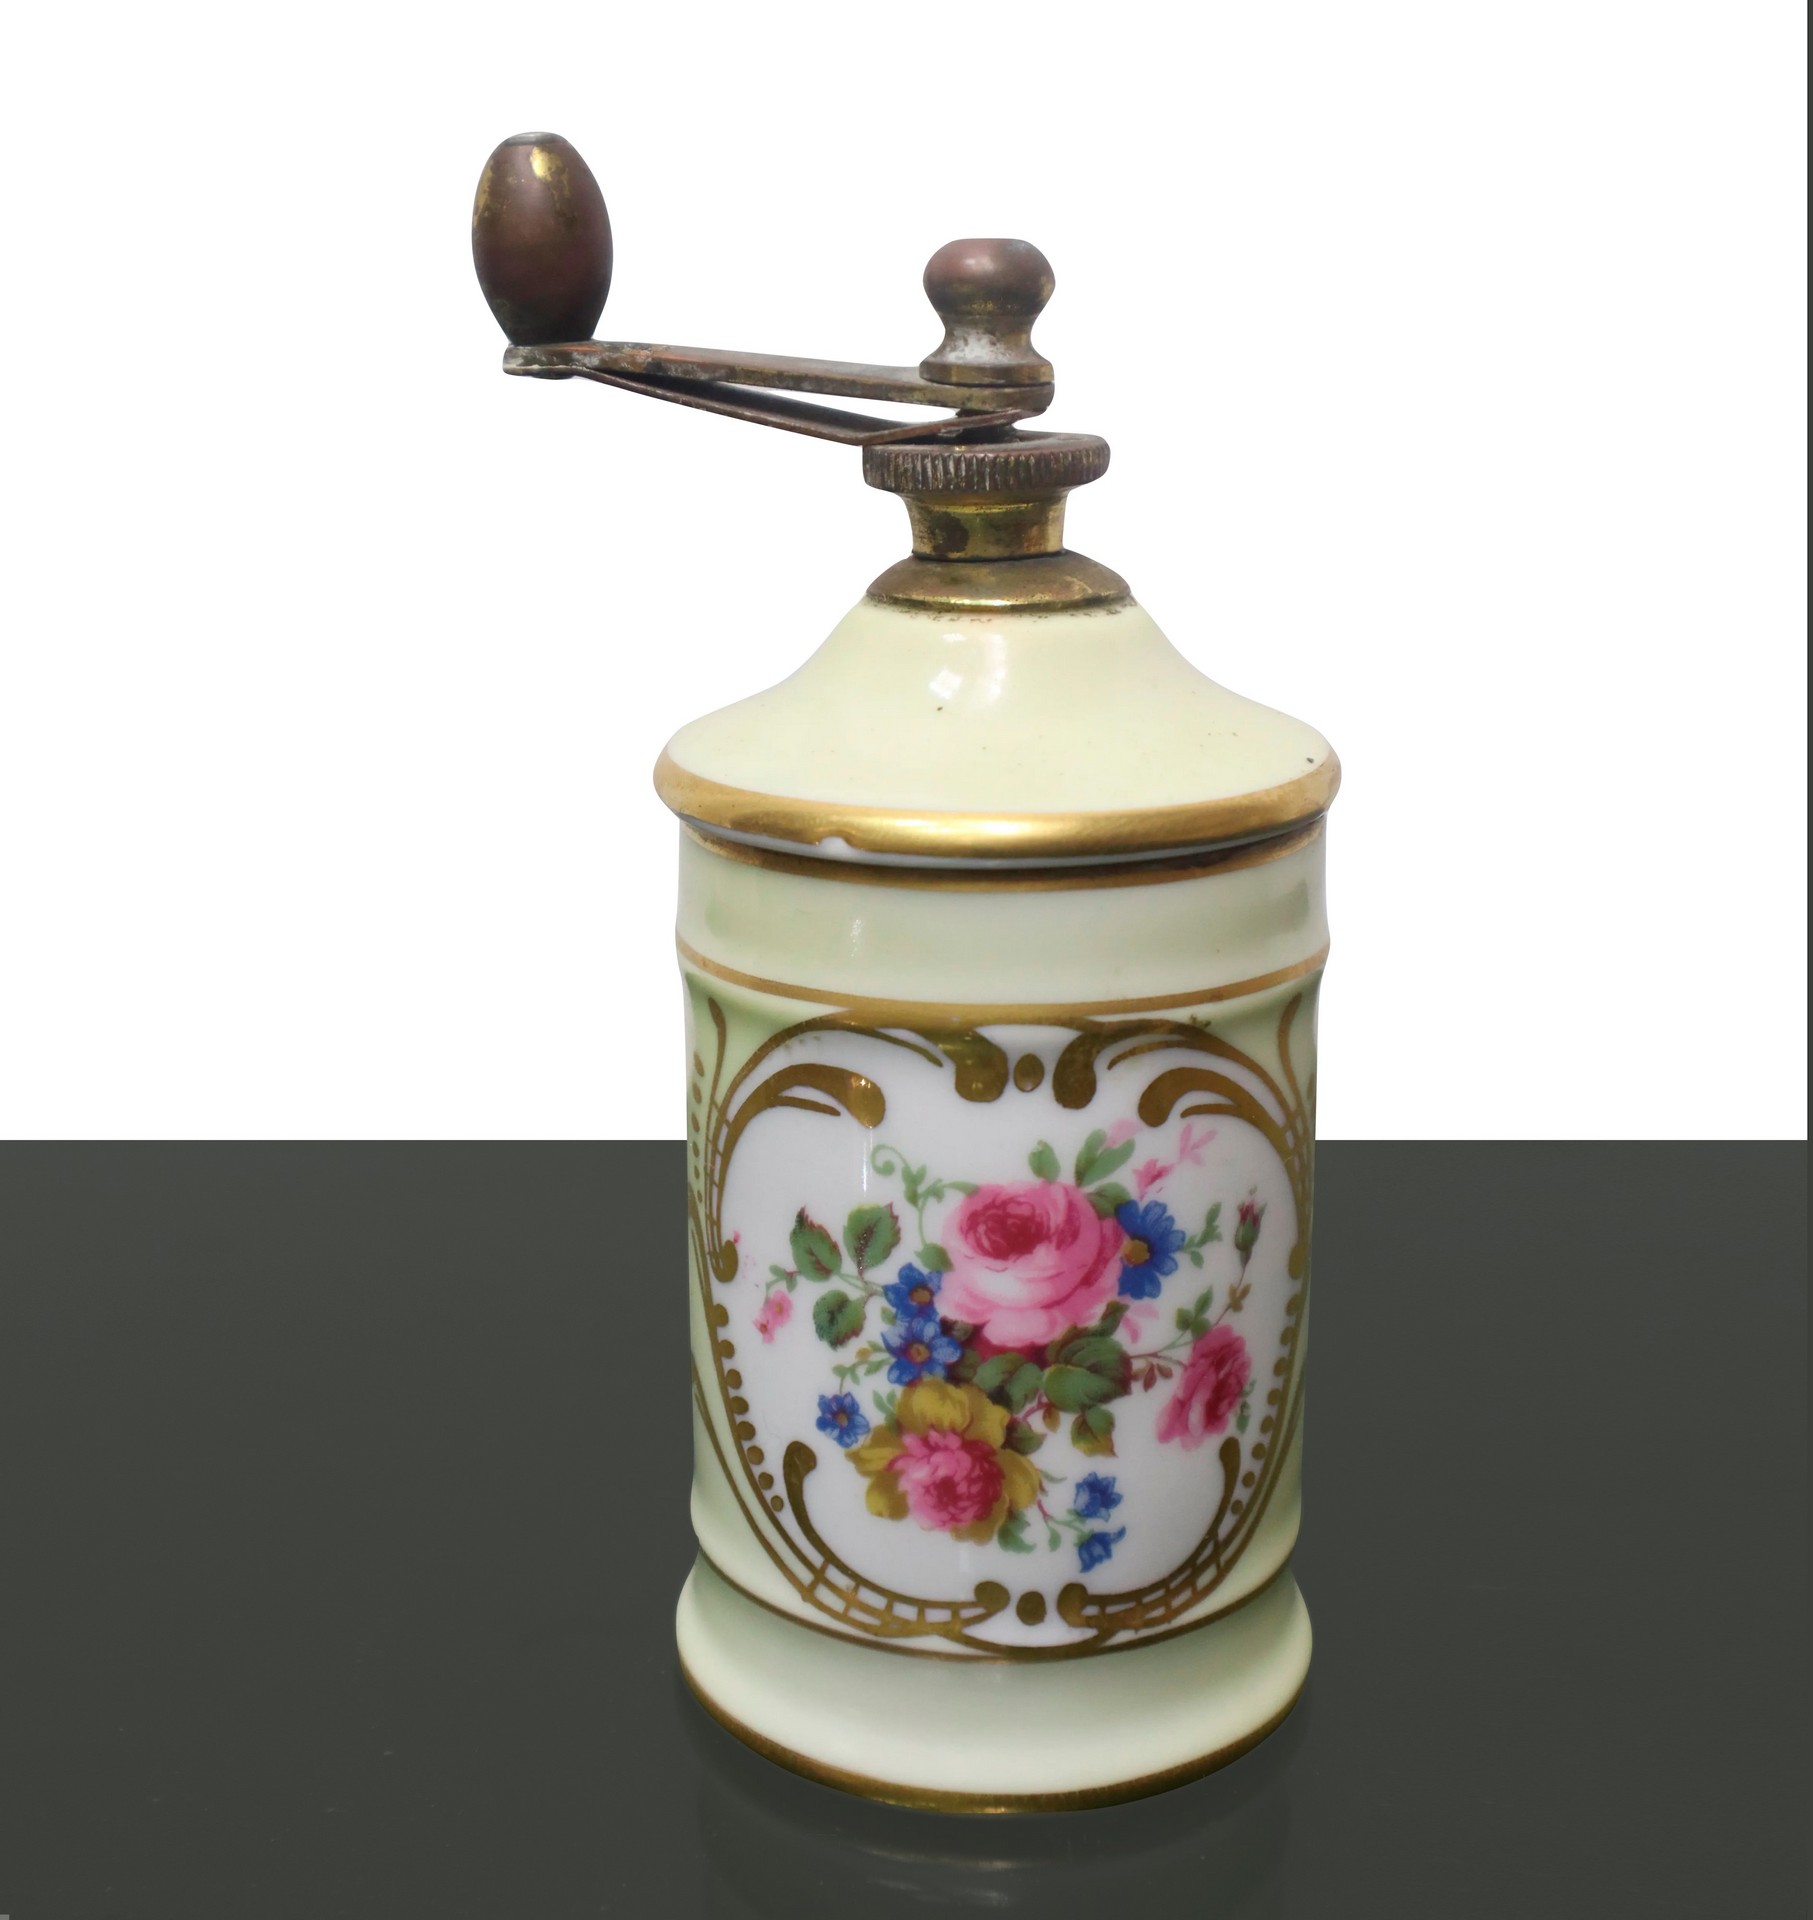 Limoges - Pepper mill - Image 2 of 5